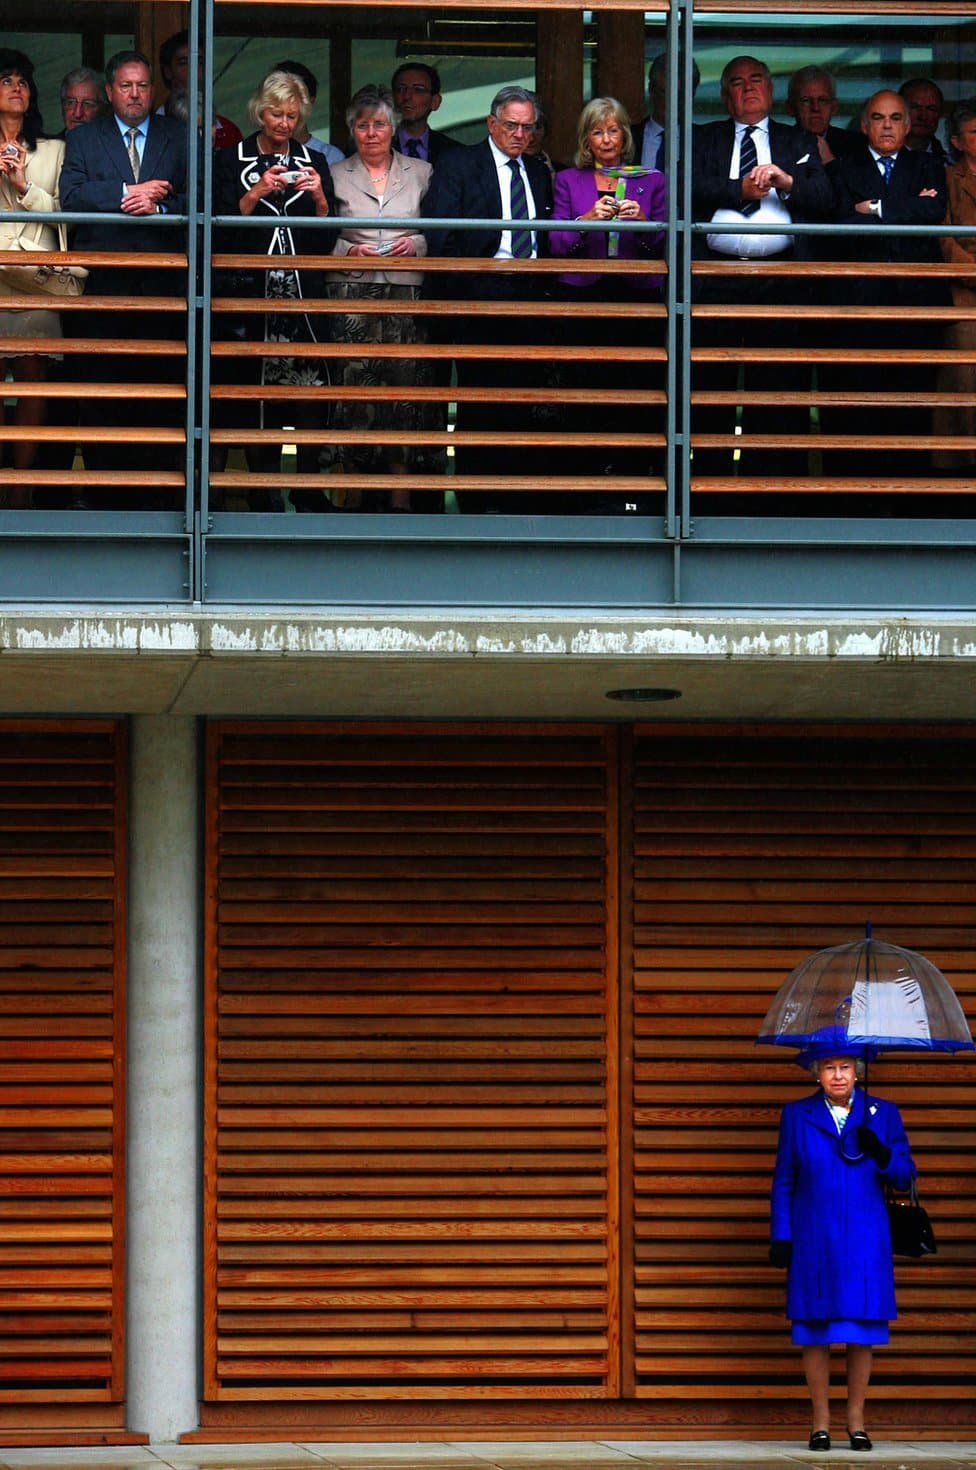 Queen Elizabeth II stands in the rain as guests take shelter at the opening of the Lawn Tennis Associations new headquarters in Roehampton, London, 2007